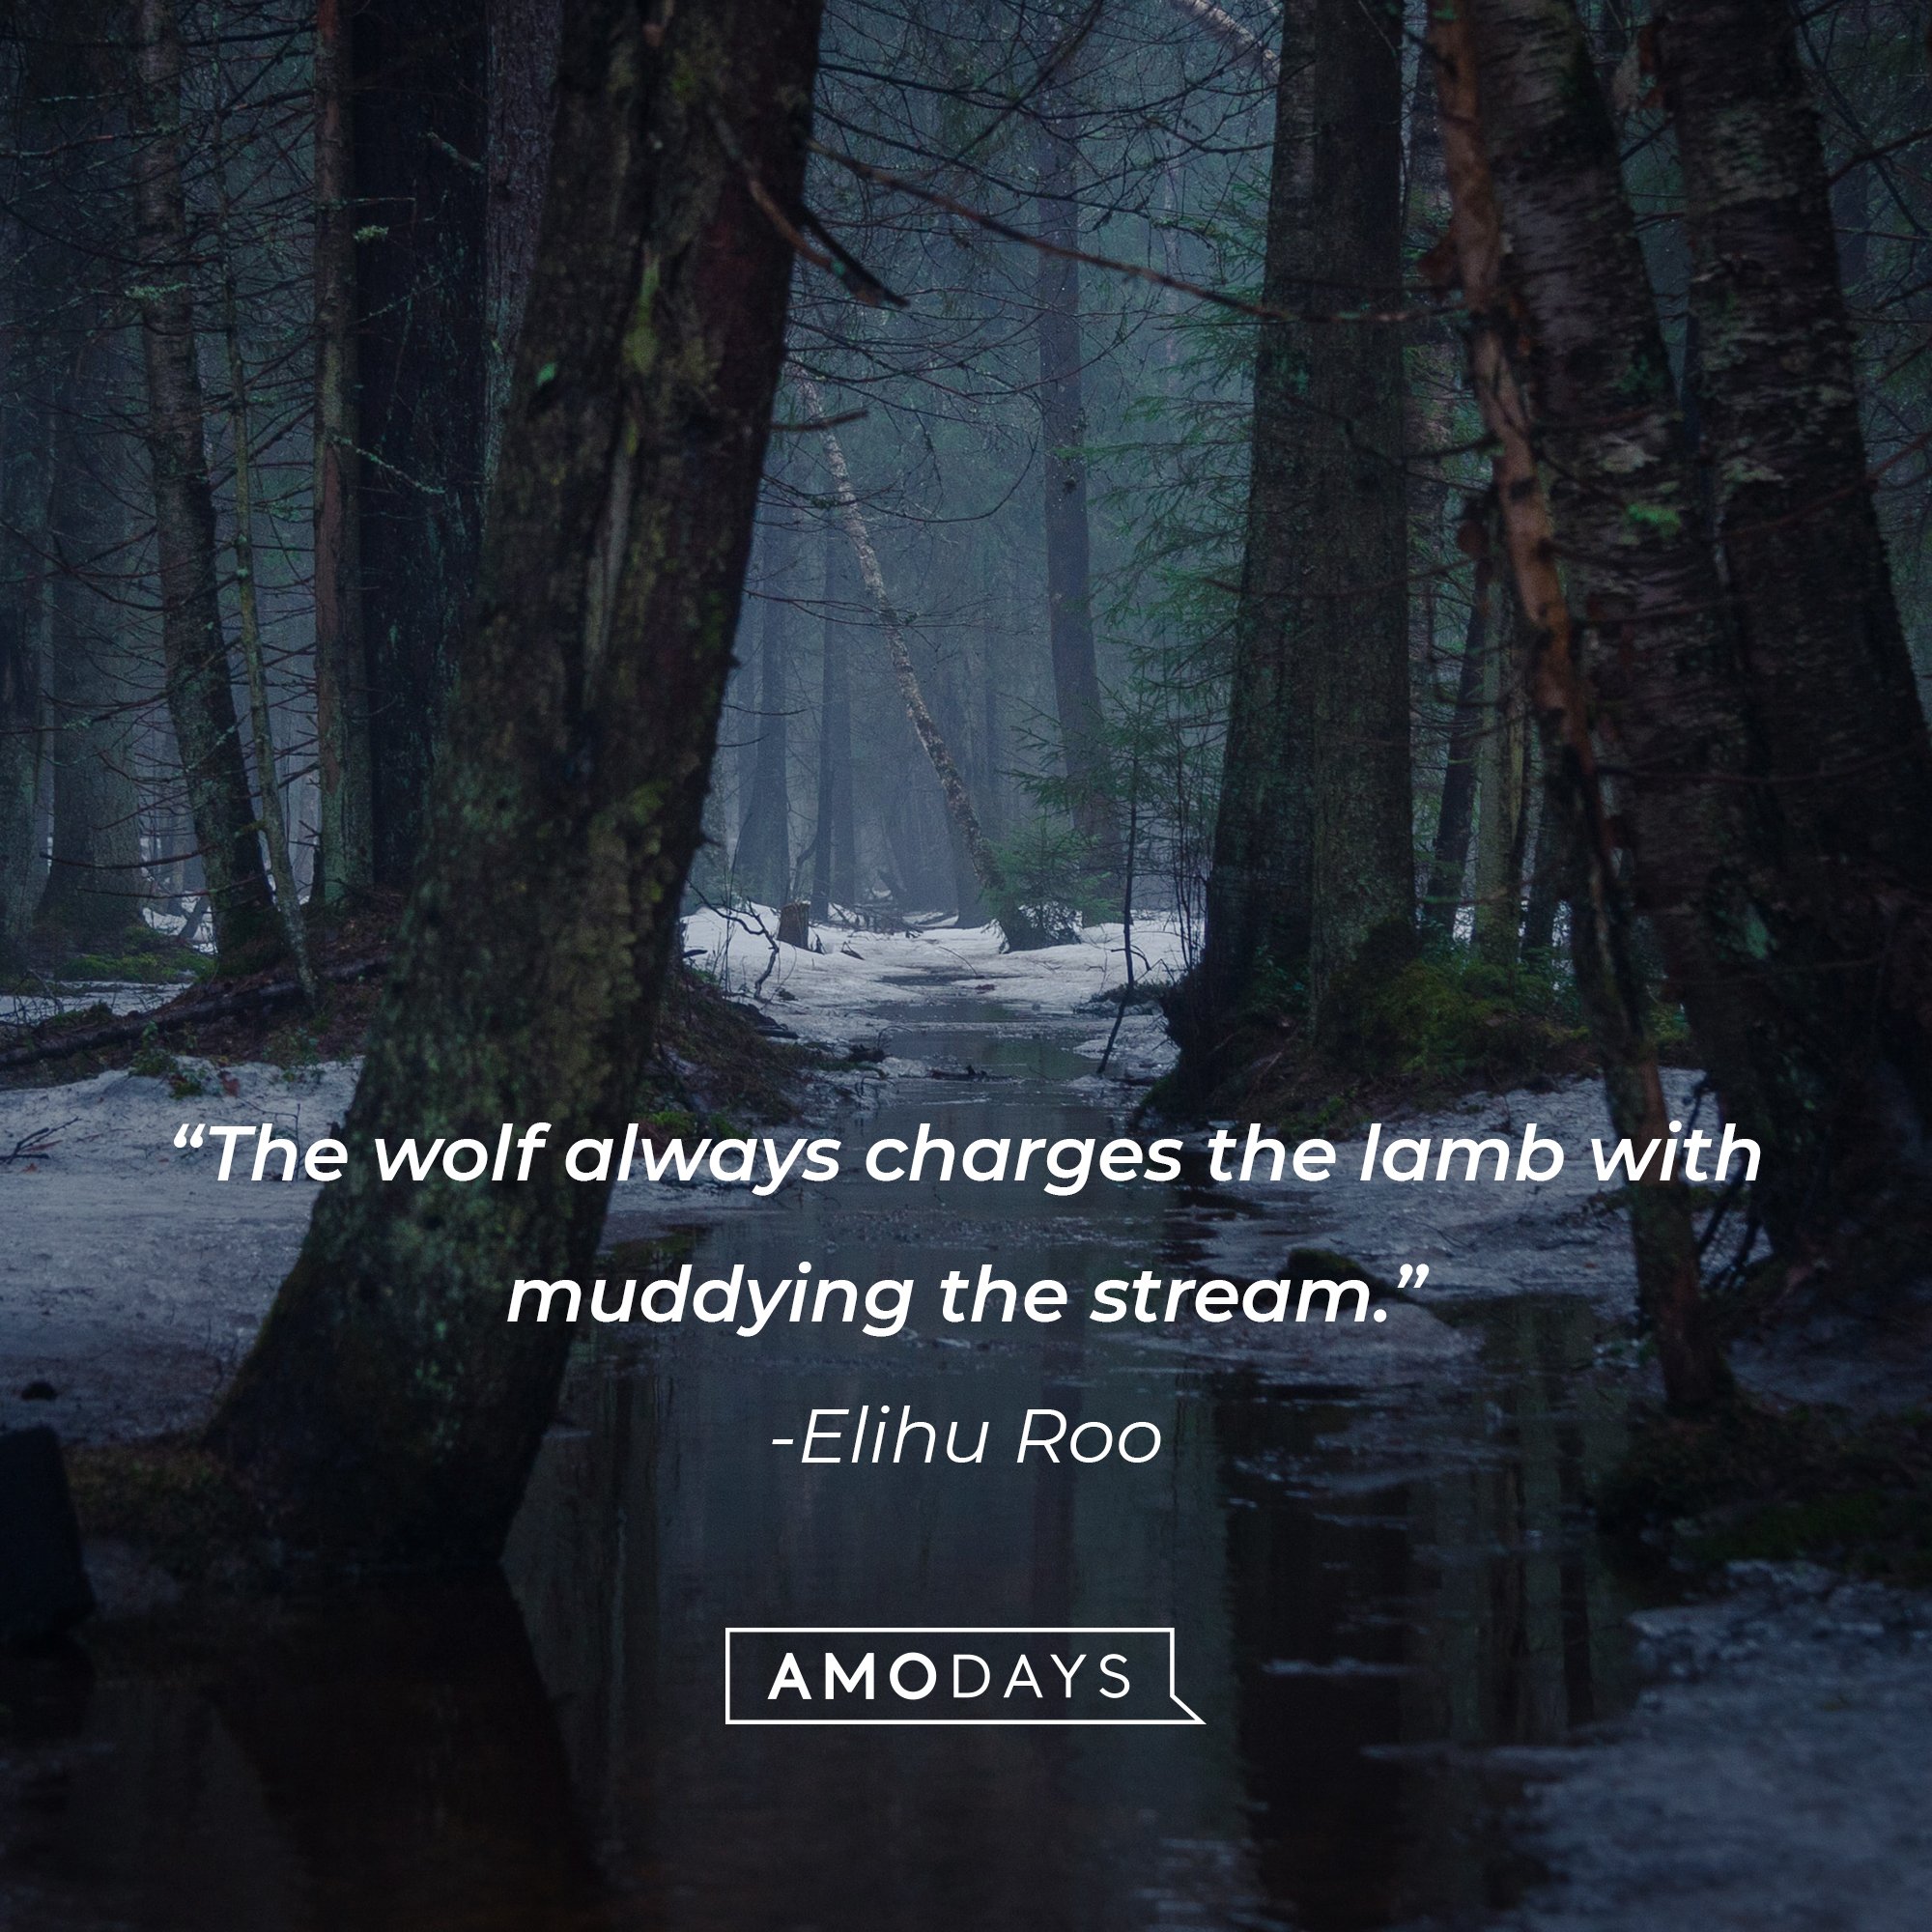  Elihu Roo's quote: “The wolf always charges the lamb with muddying the stream.” | Image: AmoDays